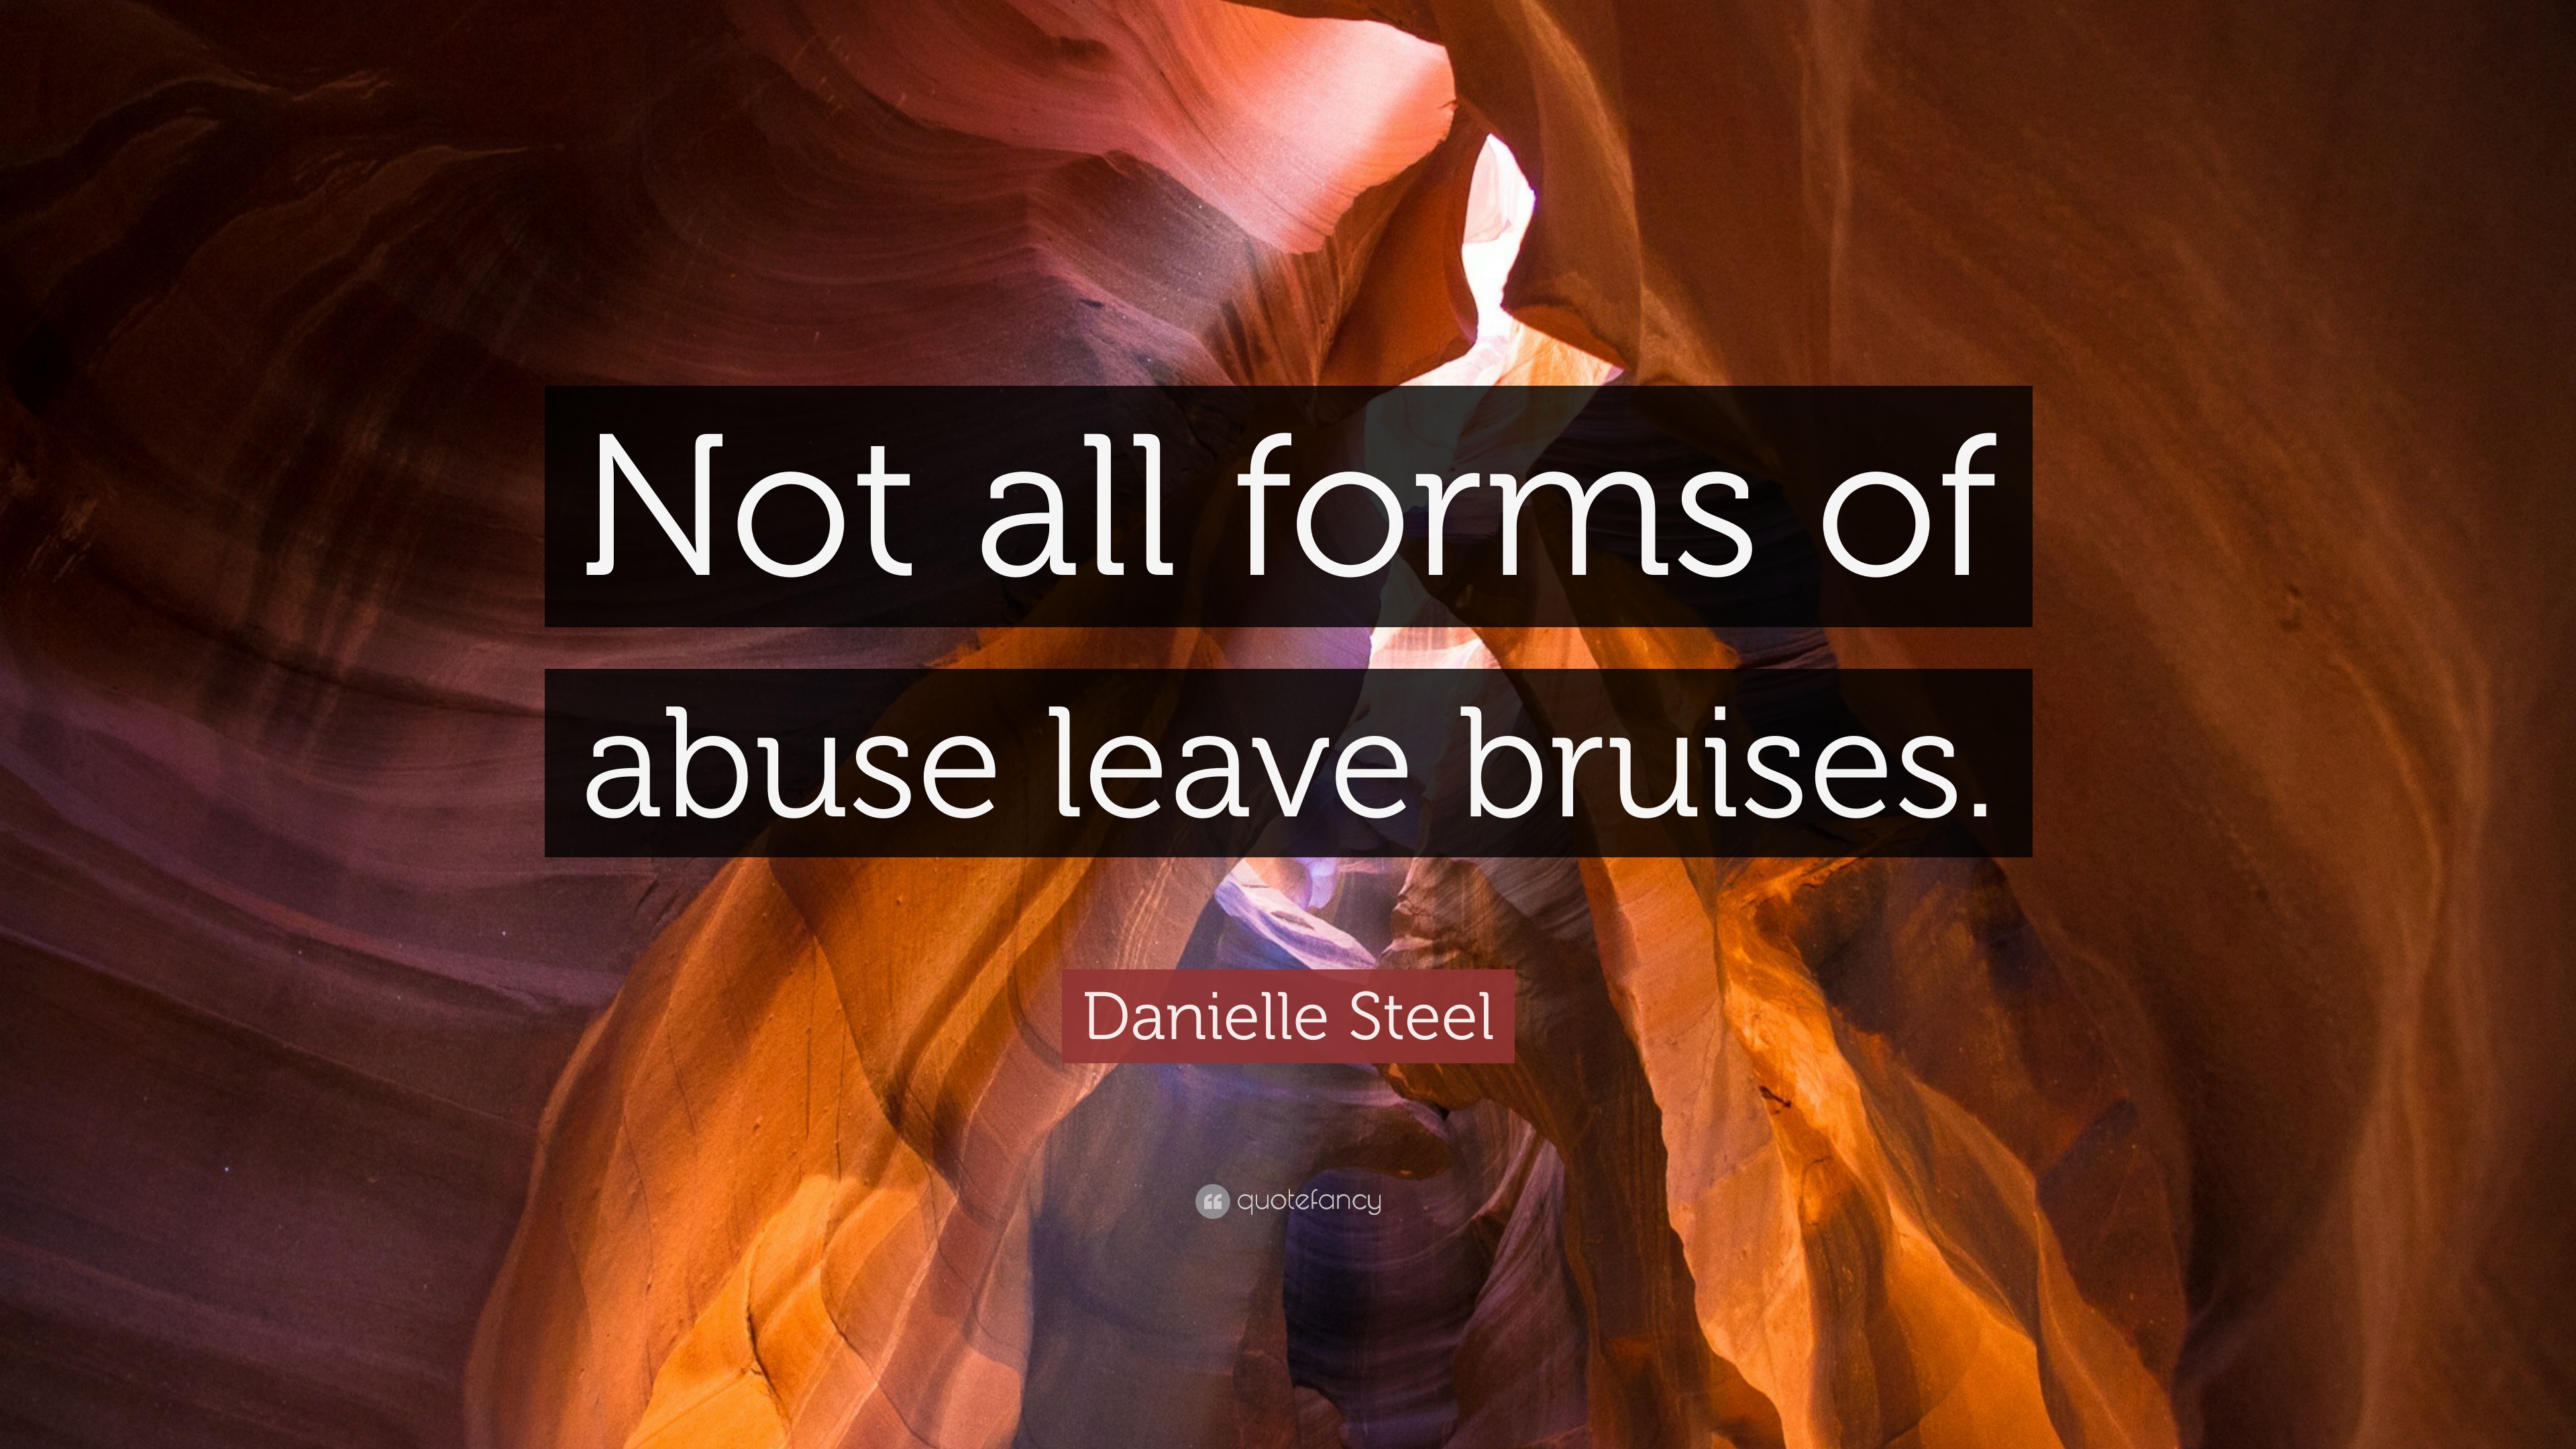 Danielle Steel Quote: “Not all forms of abuse leave bruises.” 11